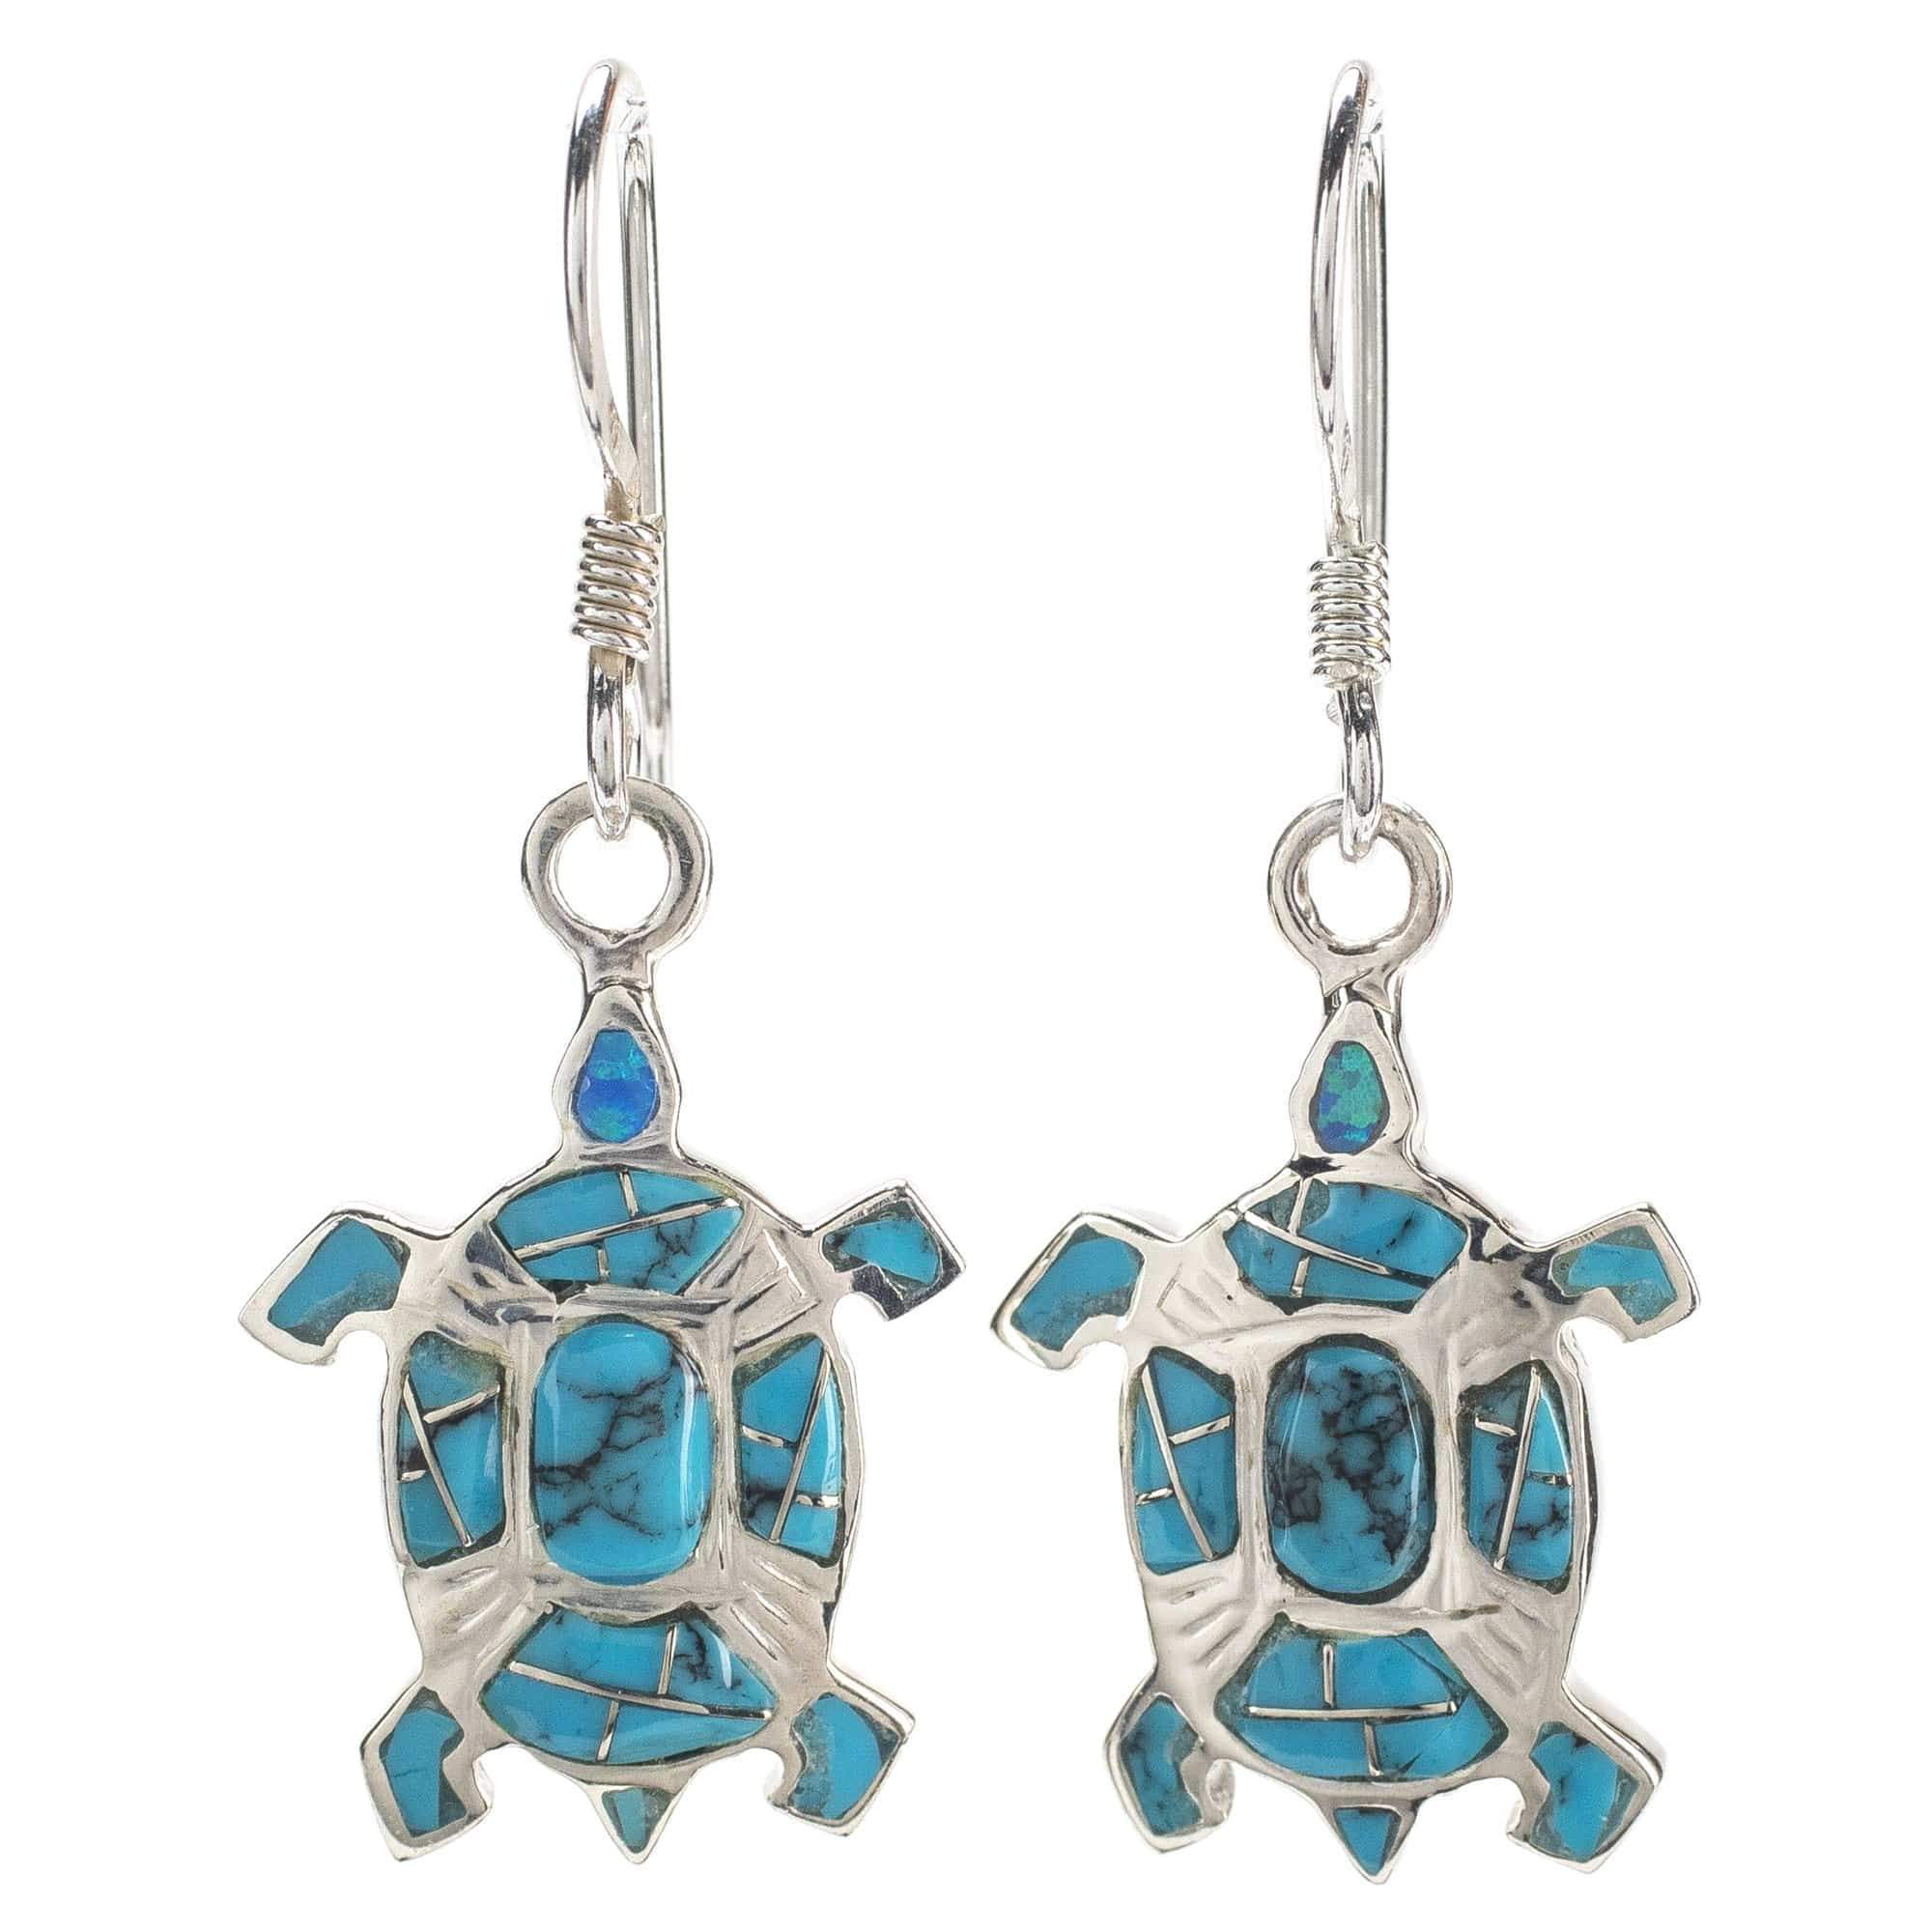 Kalifano Southwest Silver Jewelry Turquoise Turtle 925 Sterling Silver Earring with French Hook USA Handmade with Opal Accent NME.0894.TQ